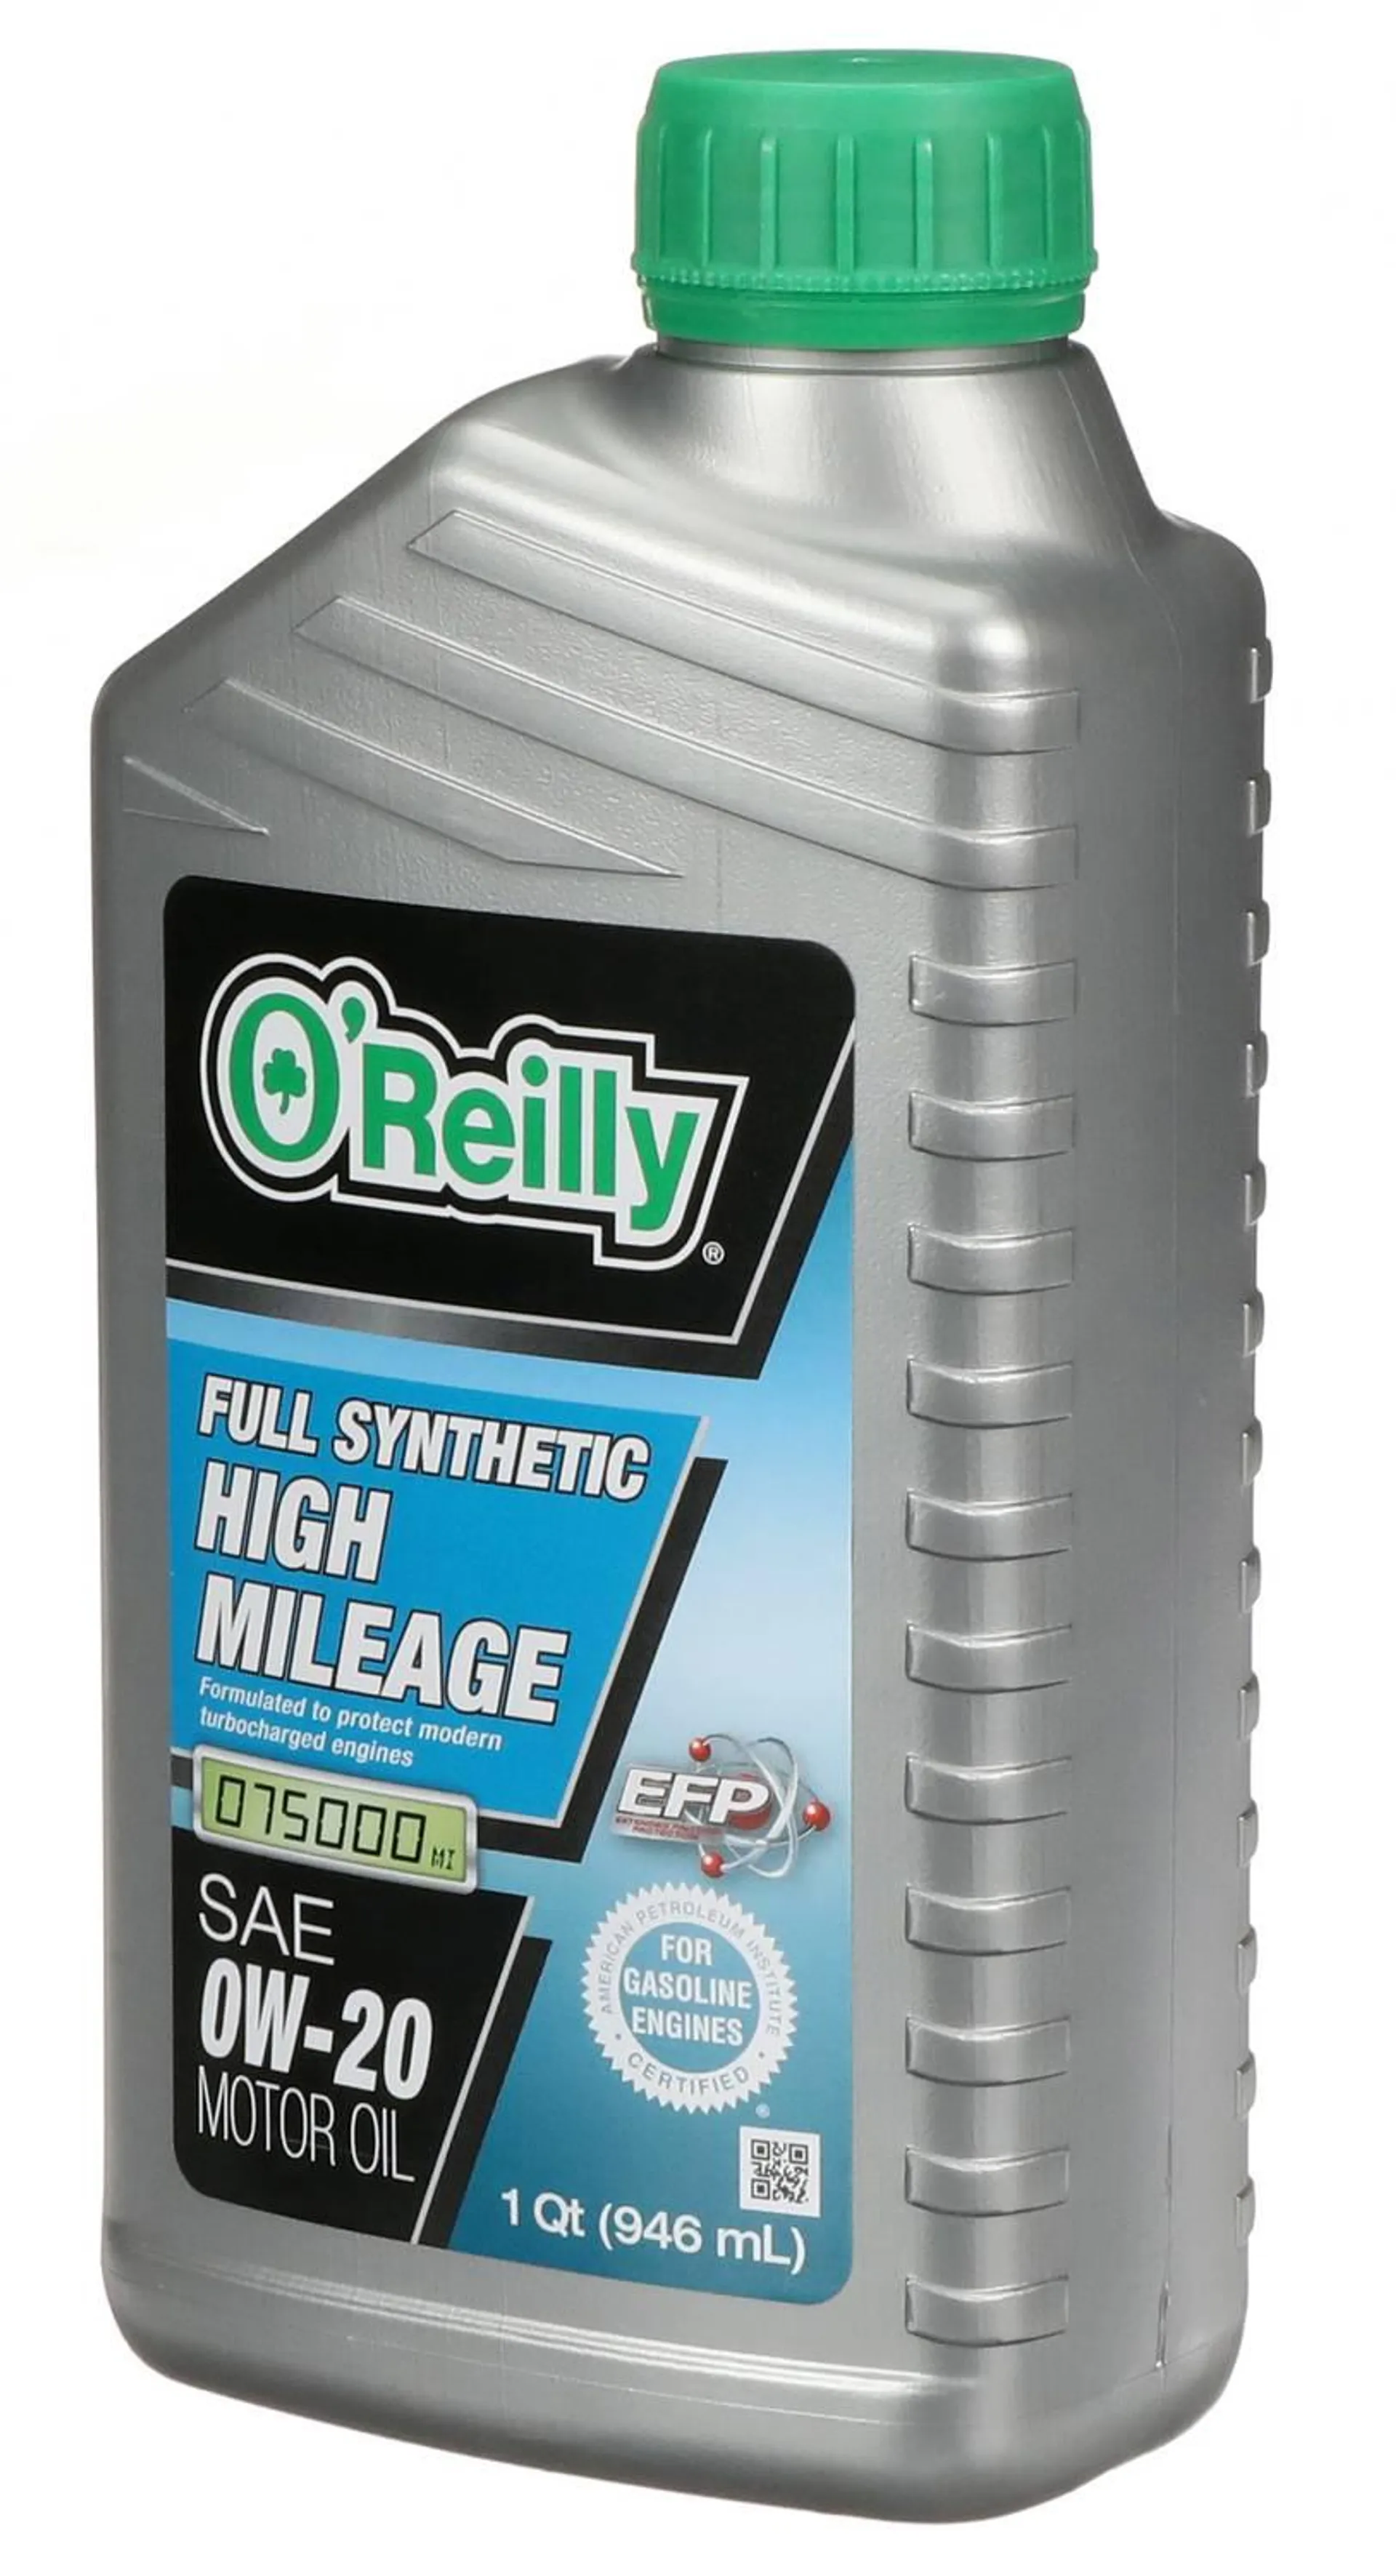 O'Reilly Full Synthetic Full Synthetic High Mileage Motor Oil 0W-20 1 Quart - HI-SYN0-20